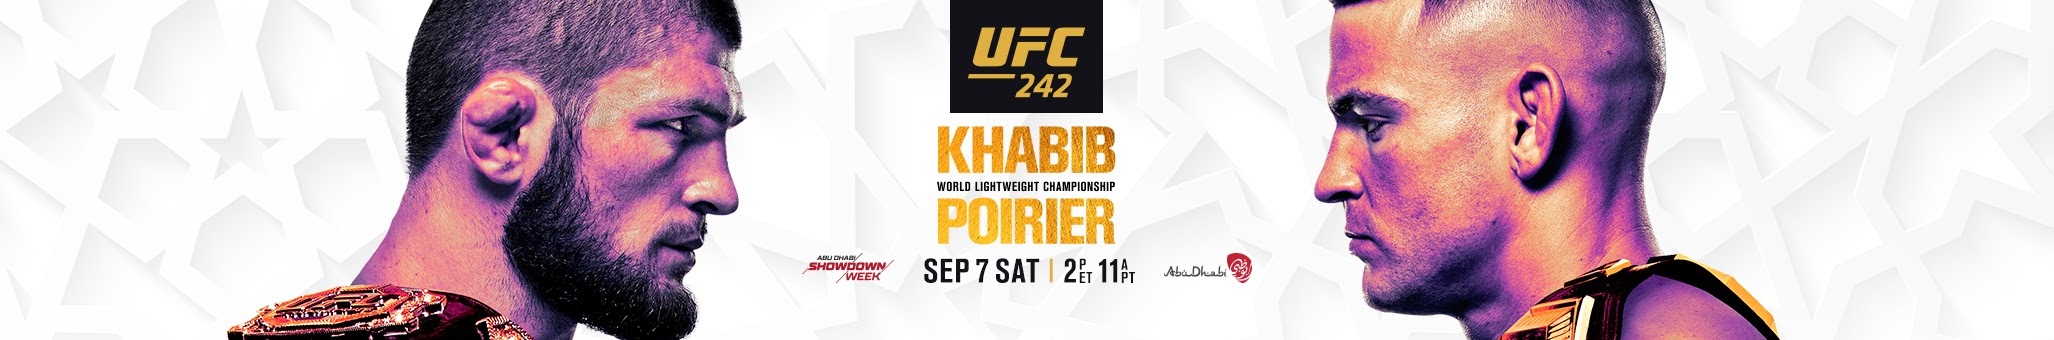 UFC 242 - Posters